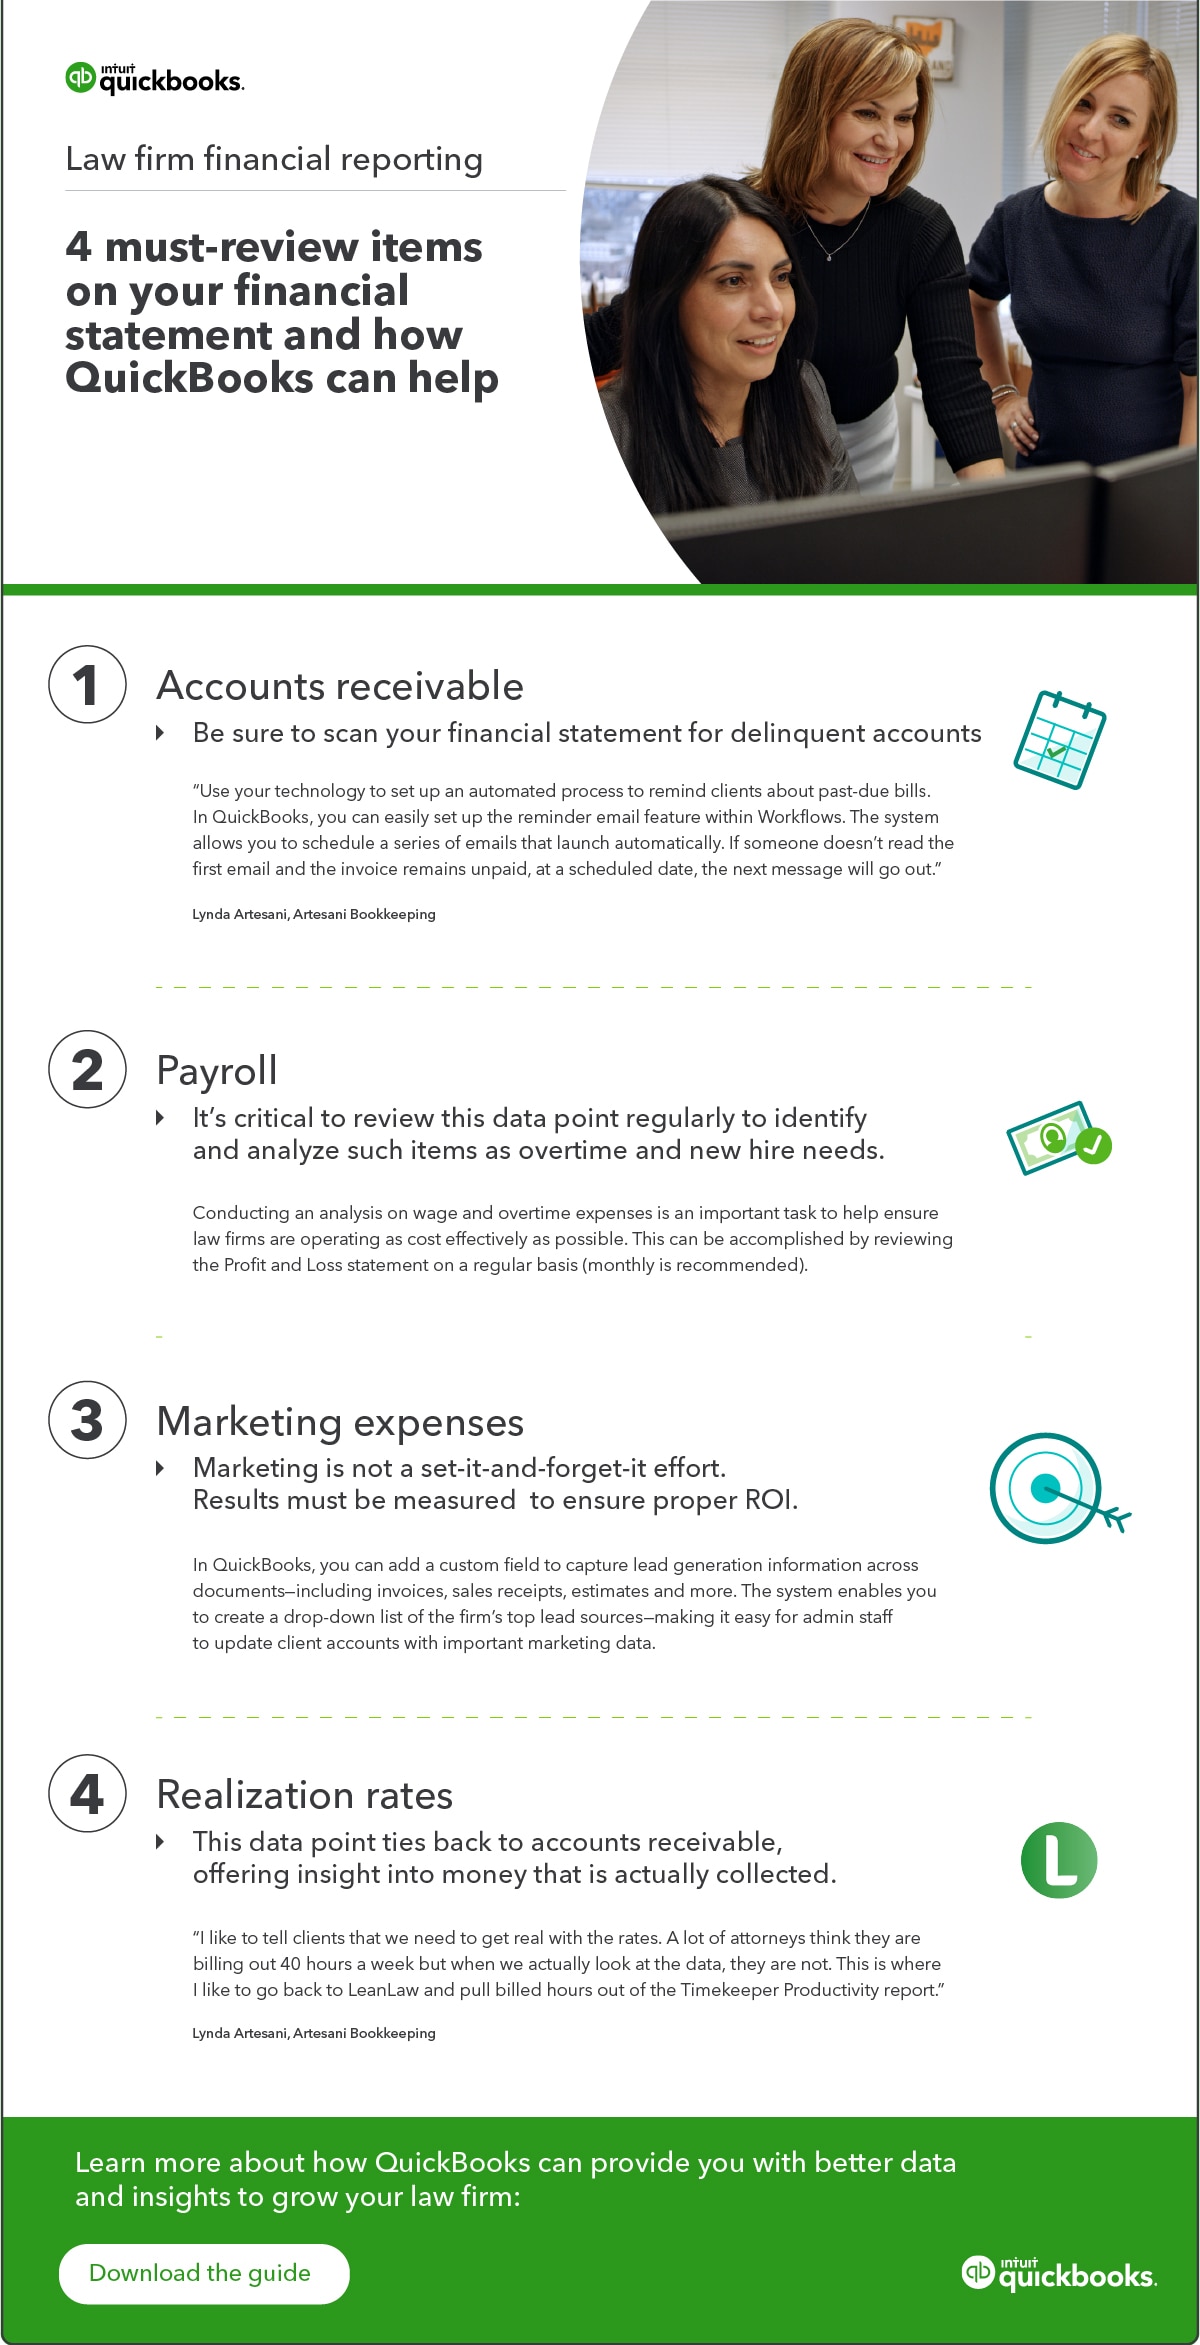 4 must-review items on your financial statement and how QuickBooks can help